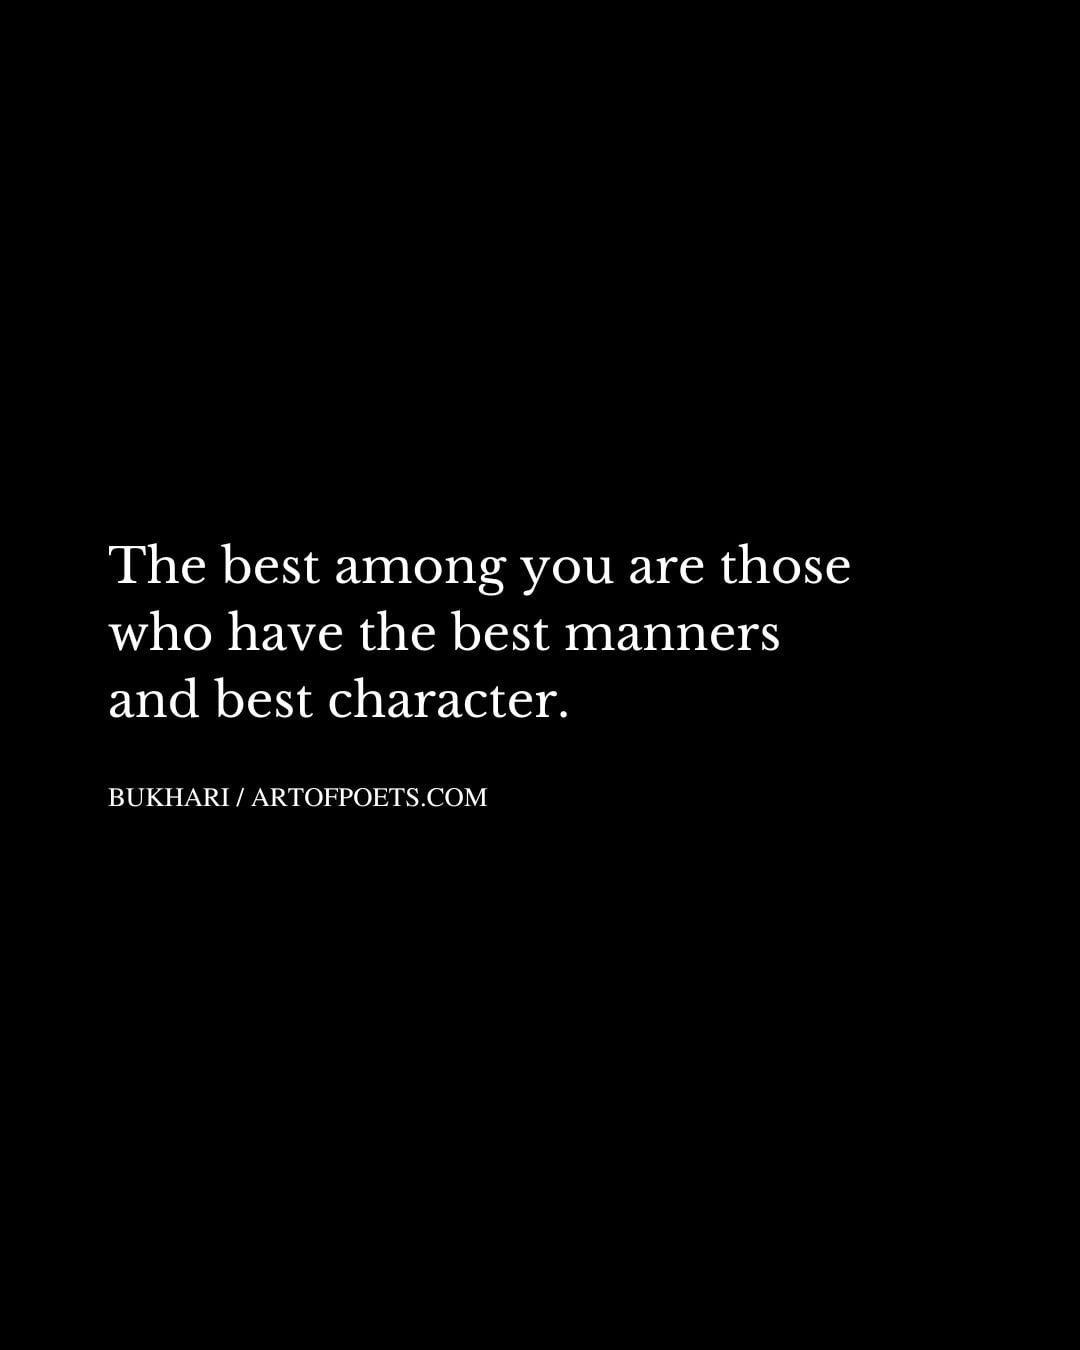 The best among you are those who have the best manners and best character